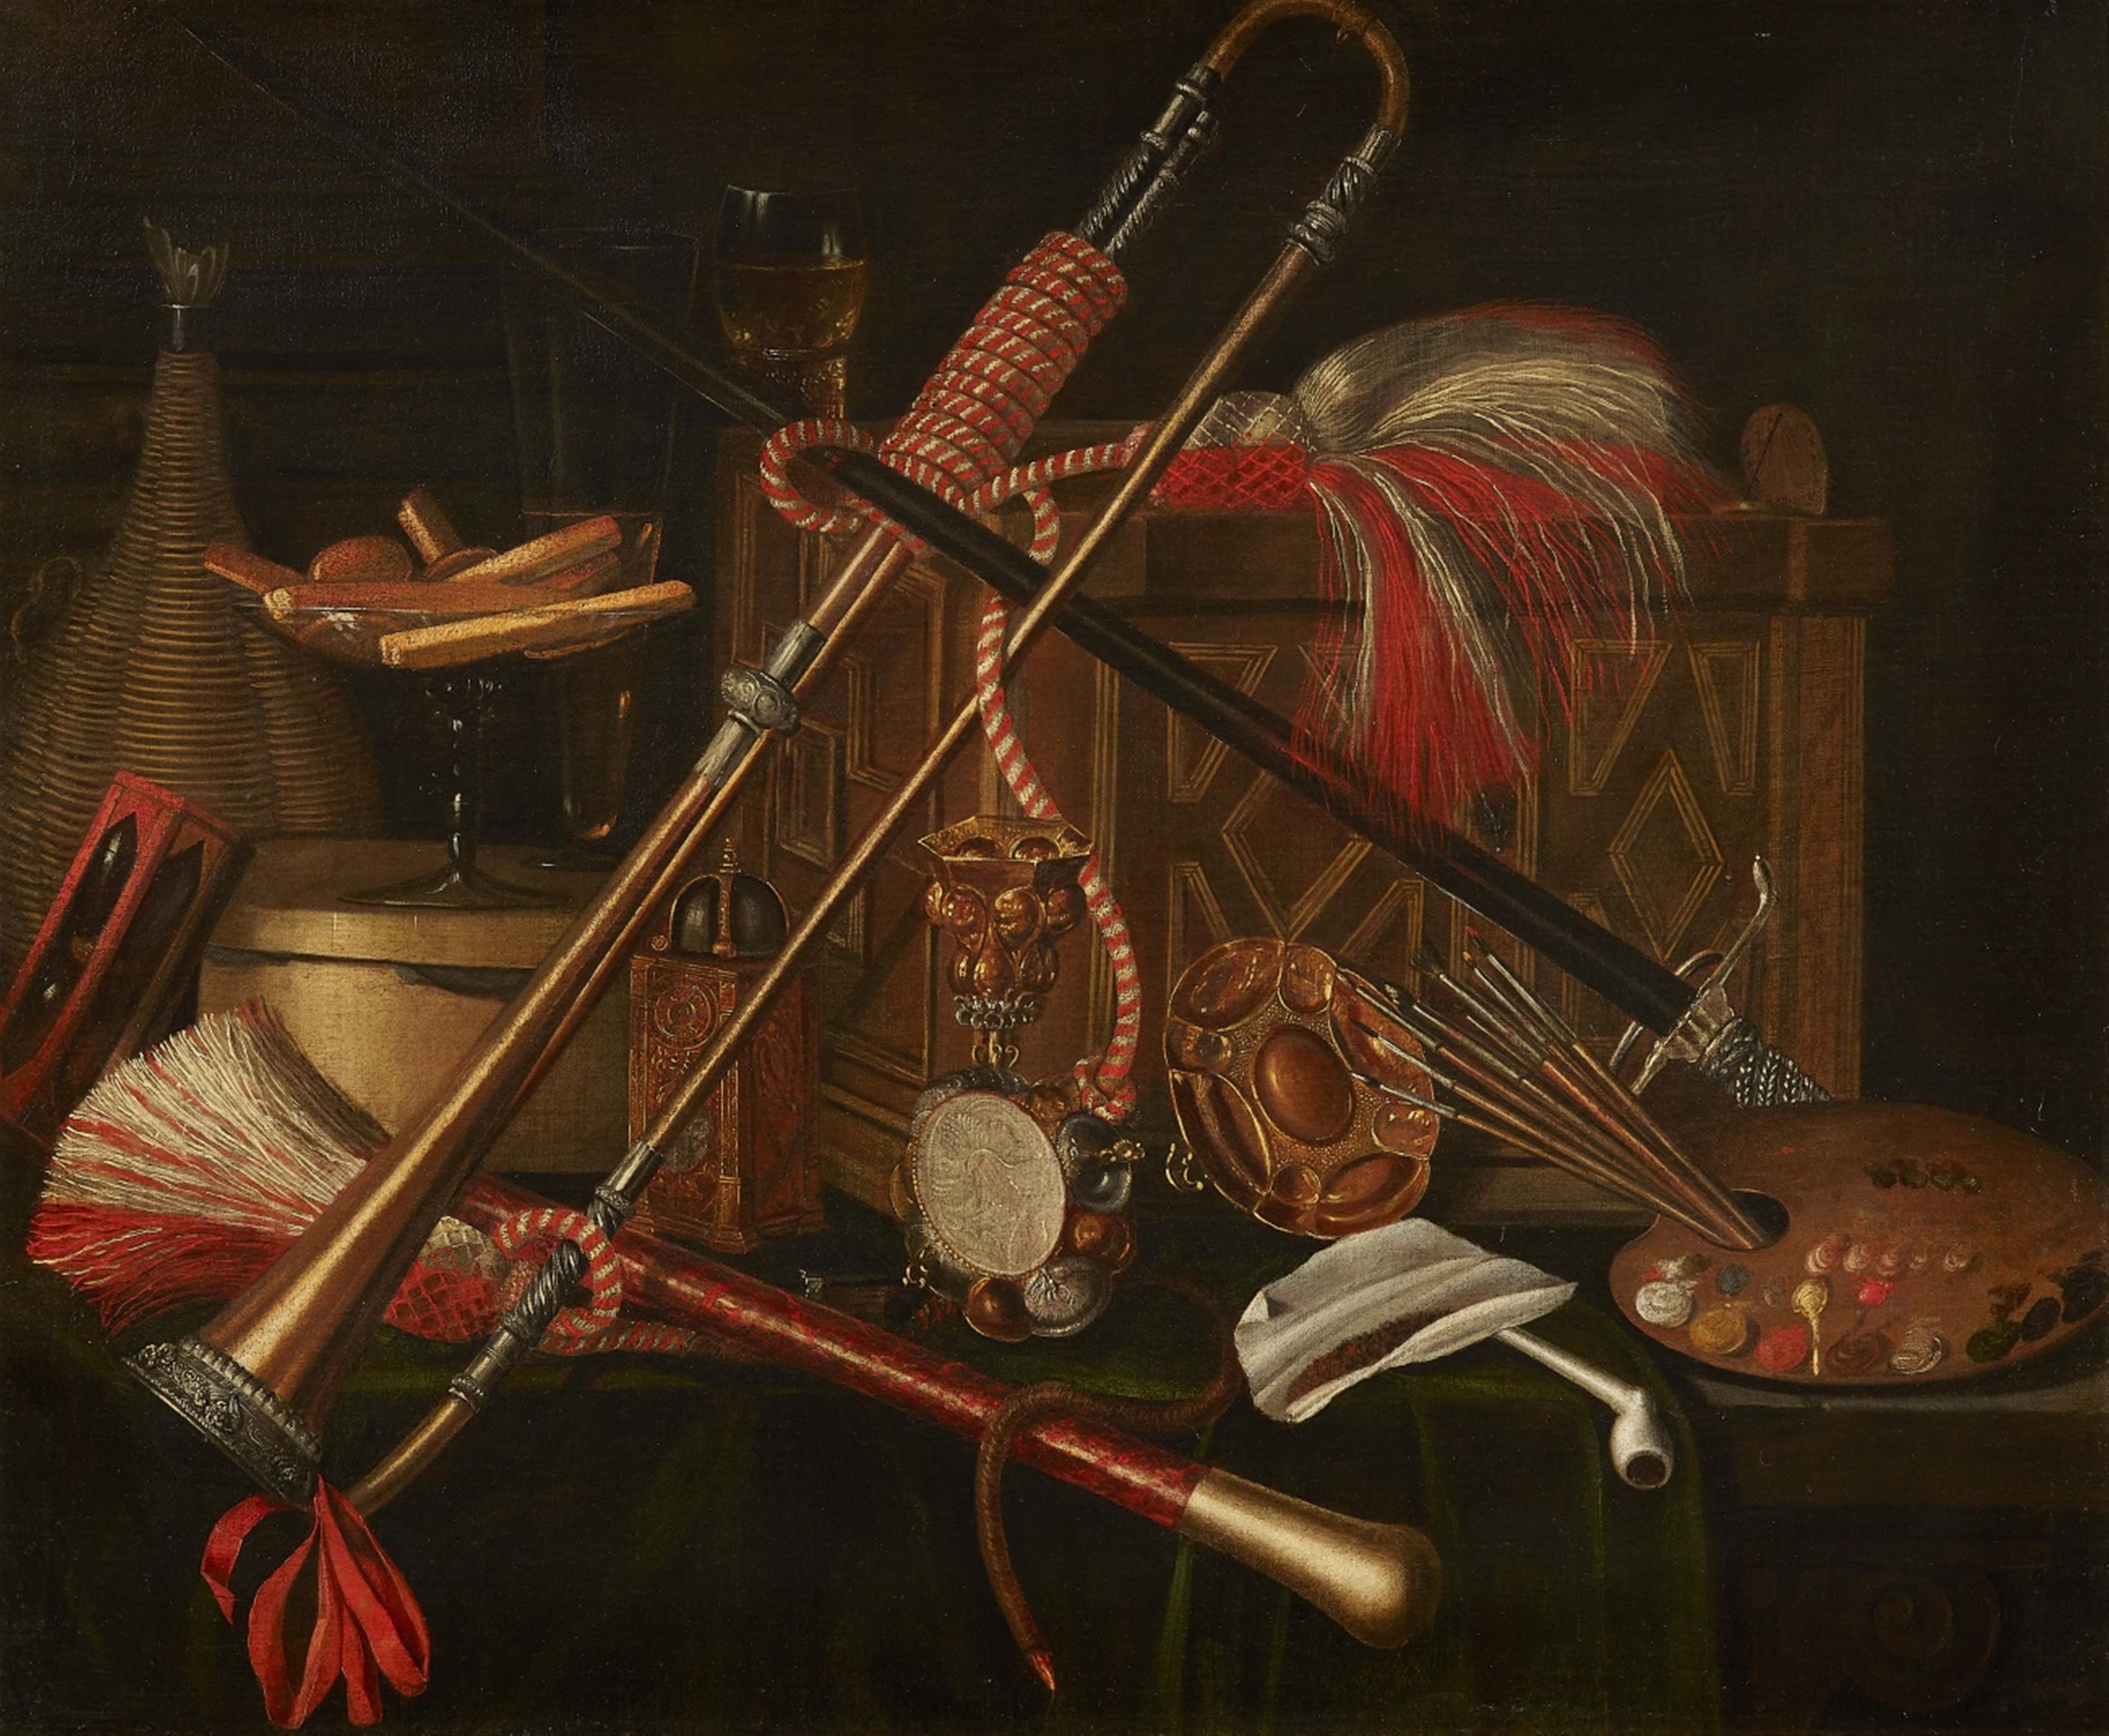 Netherlandish School second half 17th century - Still Life with a Coffer, Musical Instruments, Paint Palette, Hourglass, Precious Vessels, and Sweetmeats - image-1